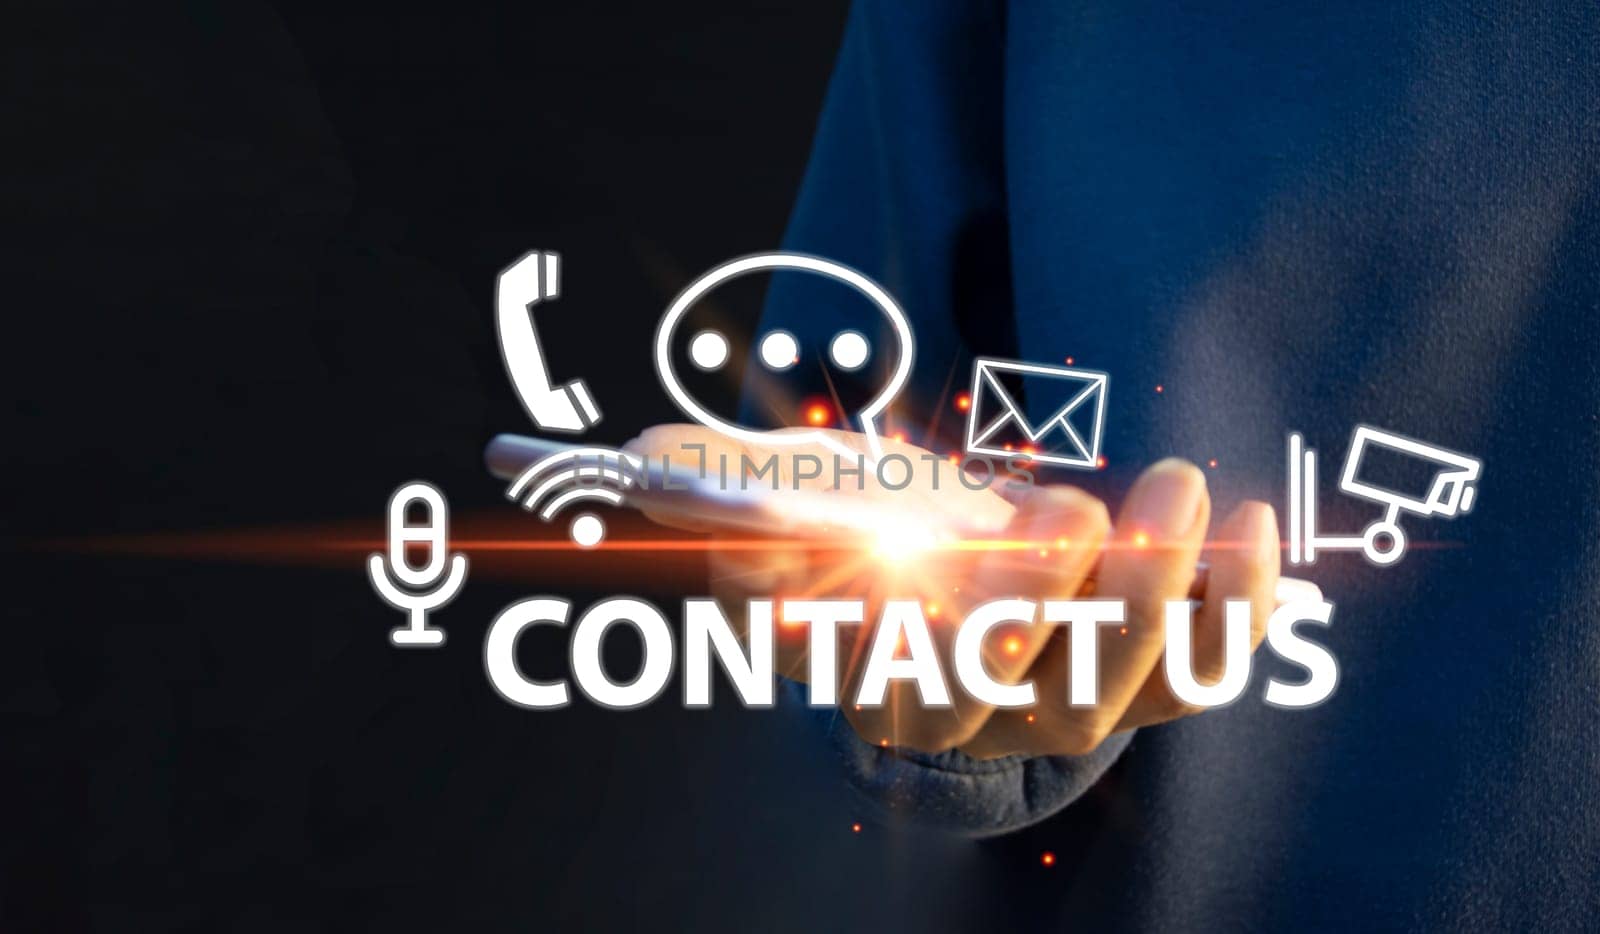 Contact us or our customer support hotline where people connect. and tap the contact icon on the virtual screen, contact us 24 hours. by boonruen